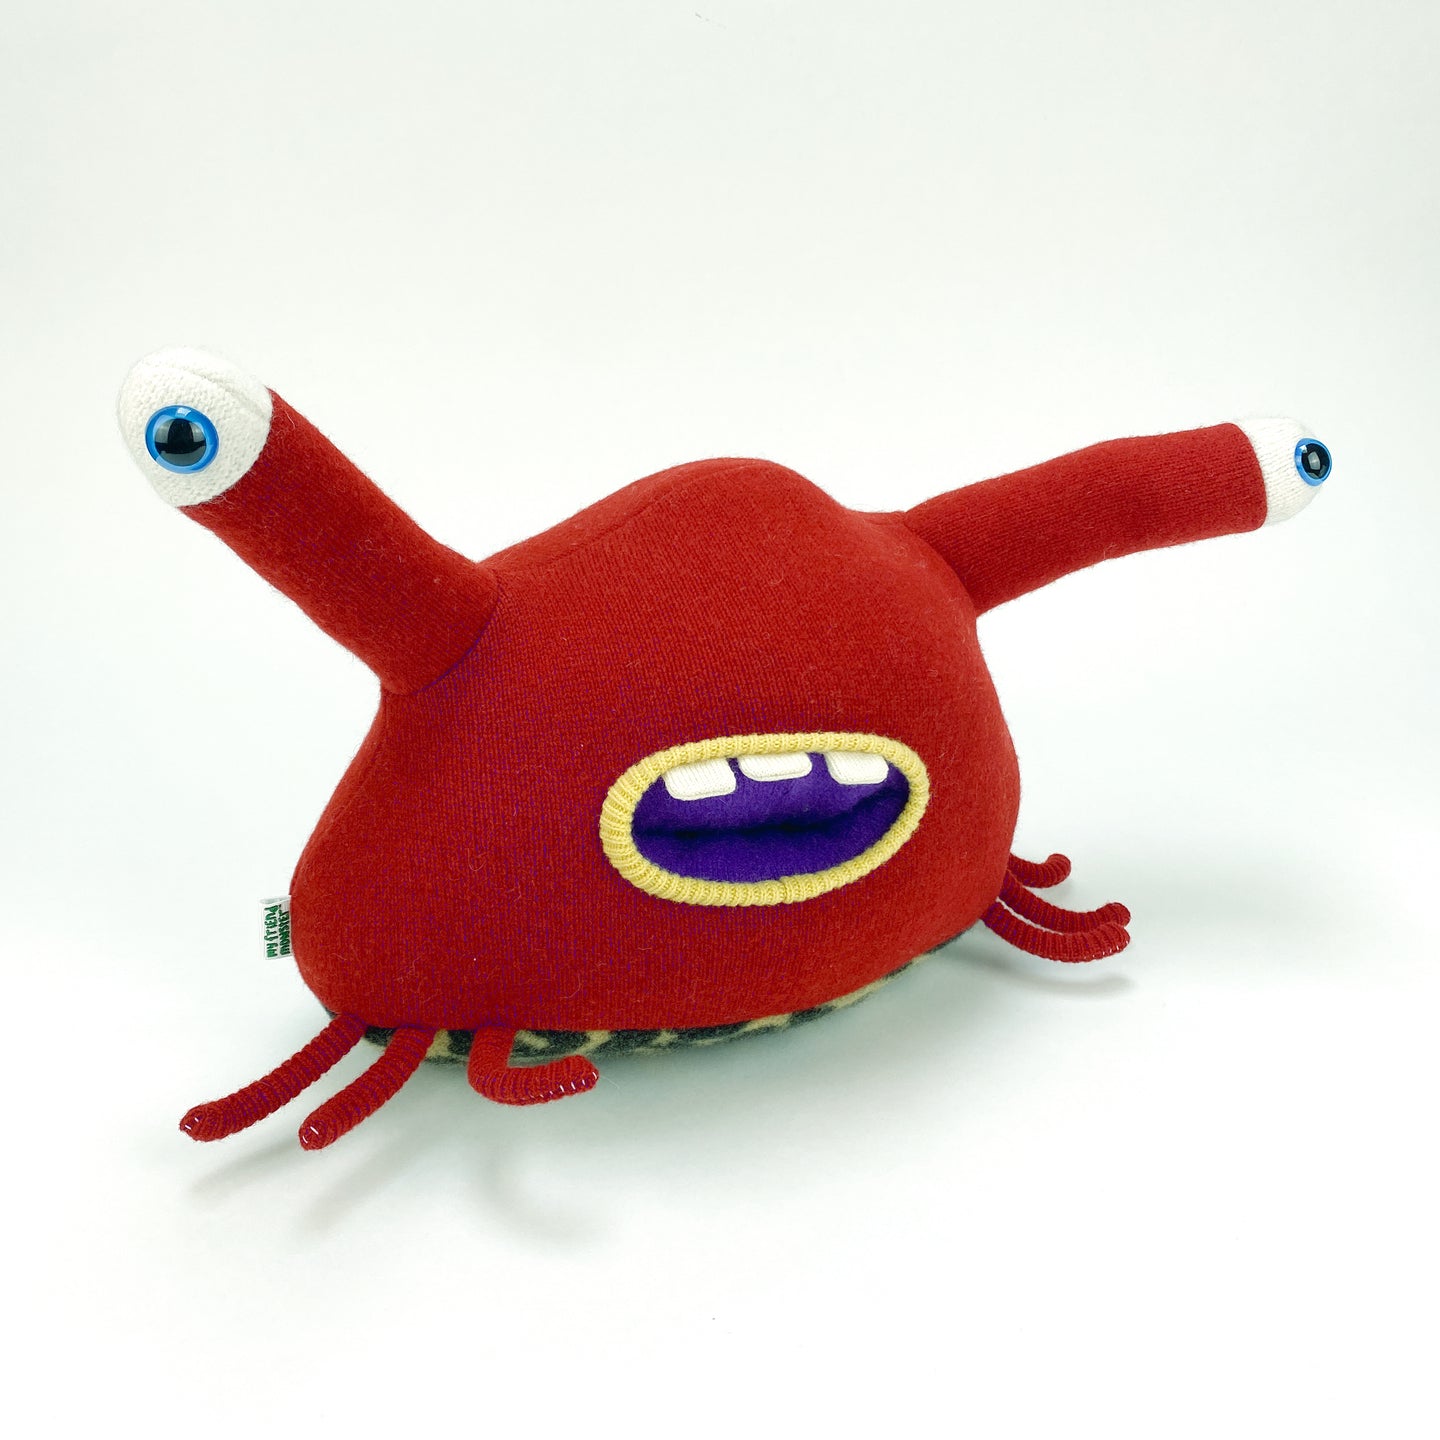 Bonk! the red handmade tentacle eyed monster by my friend monster™